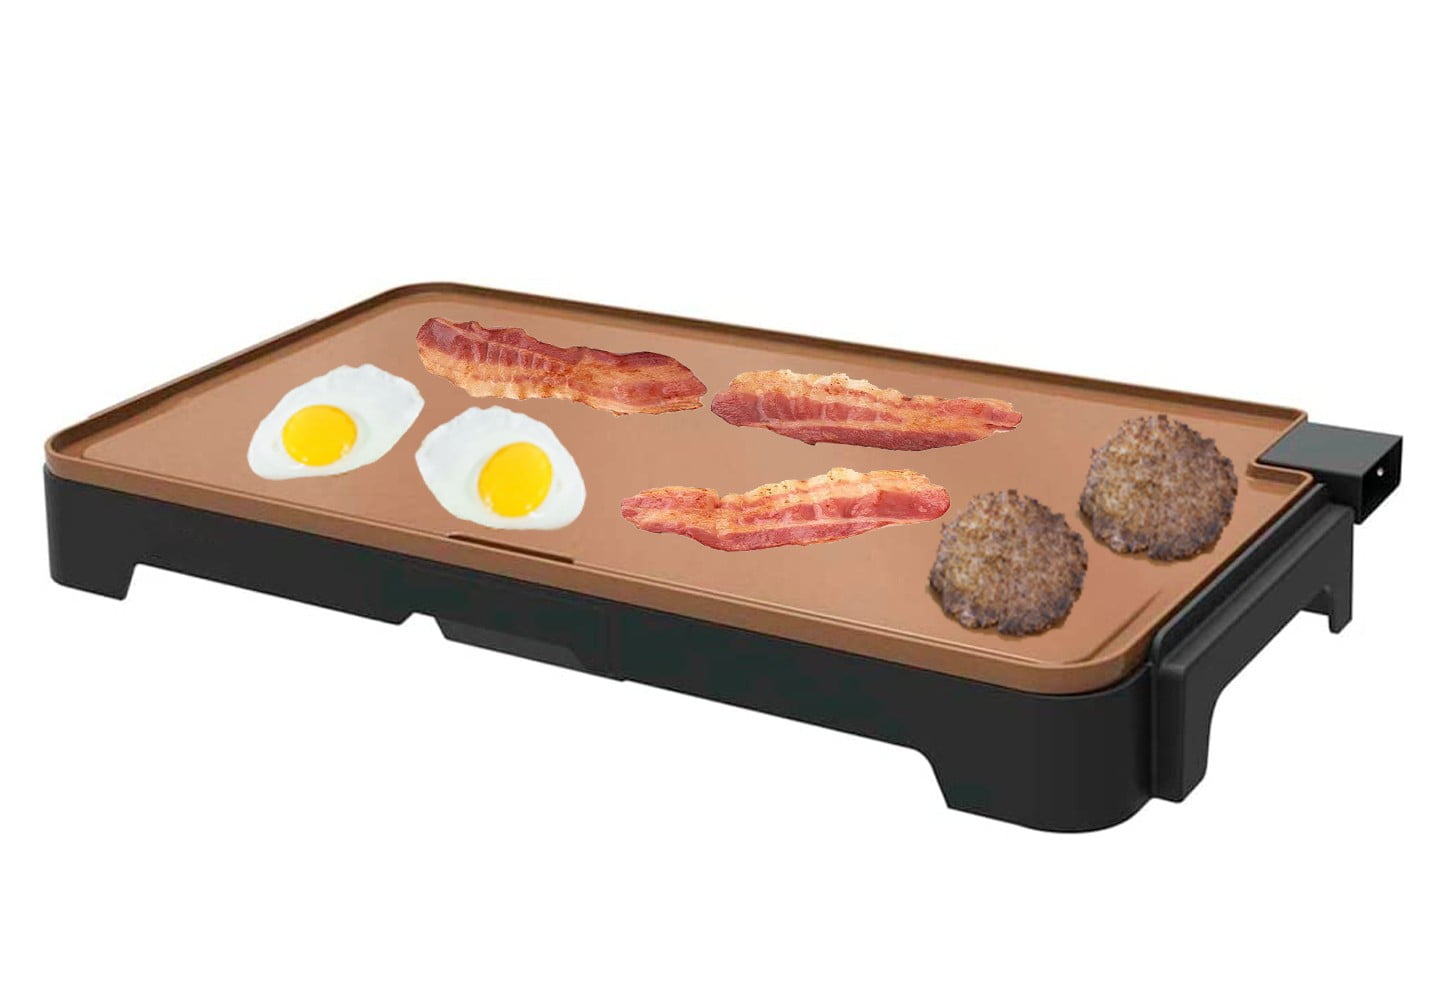 Chefman XL Electric Griddle with Removable Temperature Control, Immersible  Flat Top Grill, Burger, Eggs, Pancake Griddle, Nonstick Extra Large Cooking